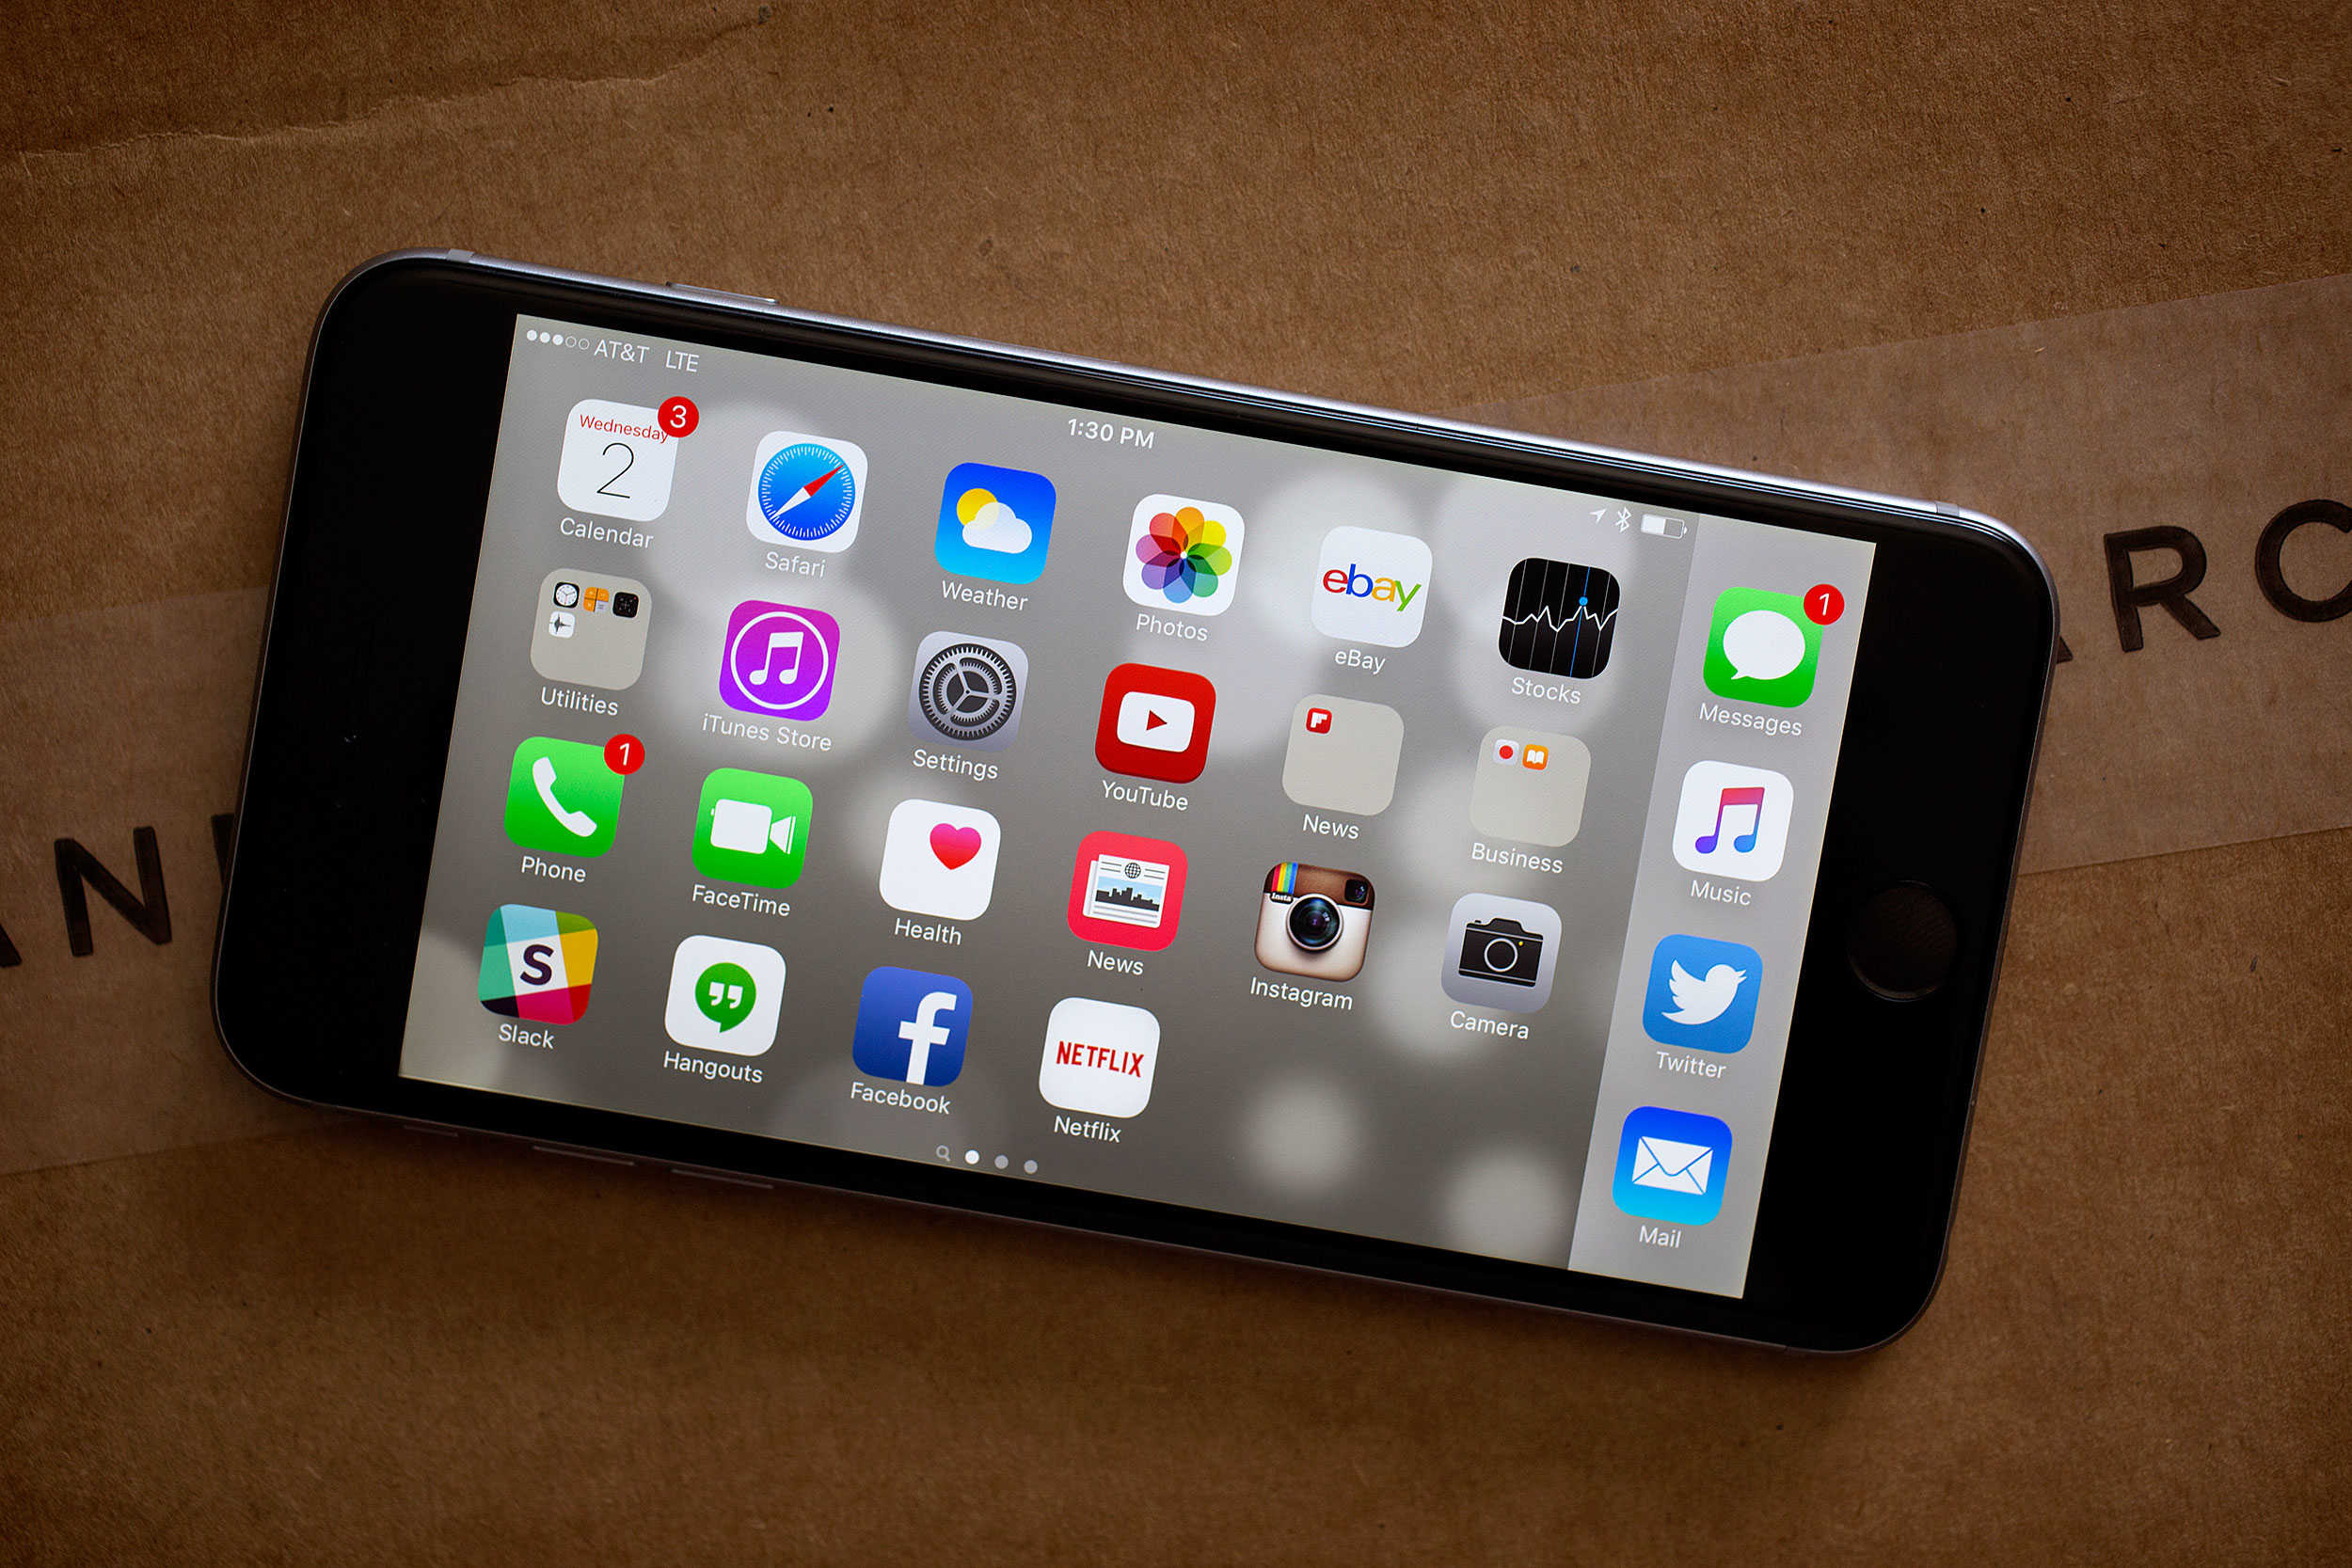 It's time to get ready for your iOS 9 upgrade.